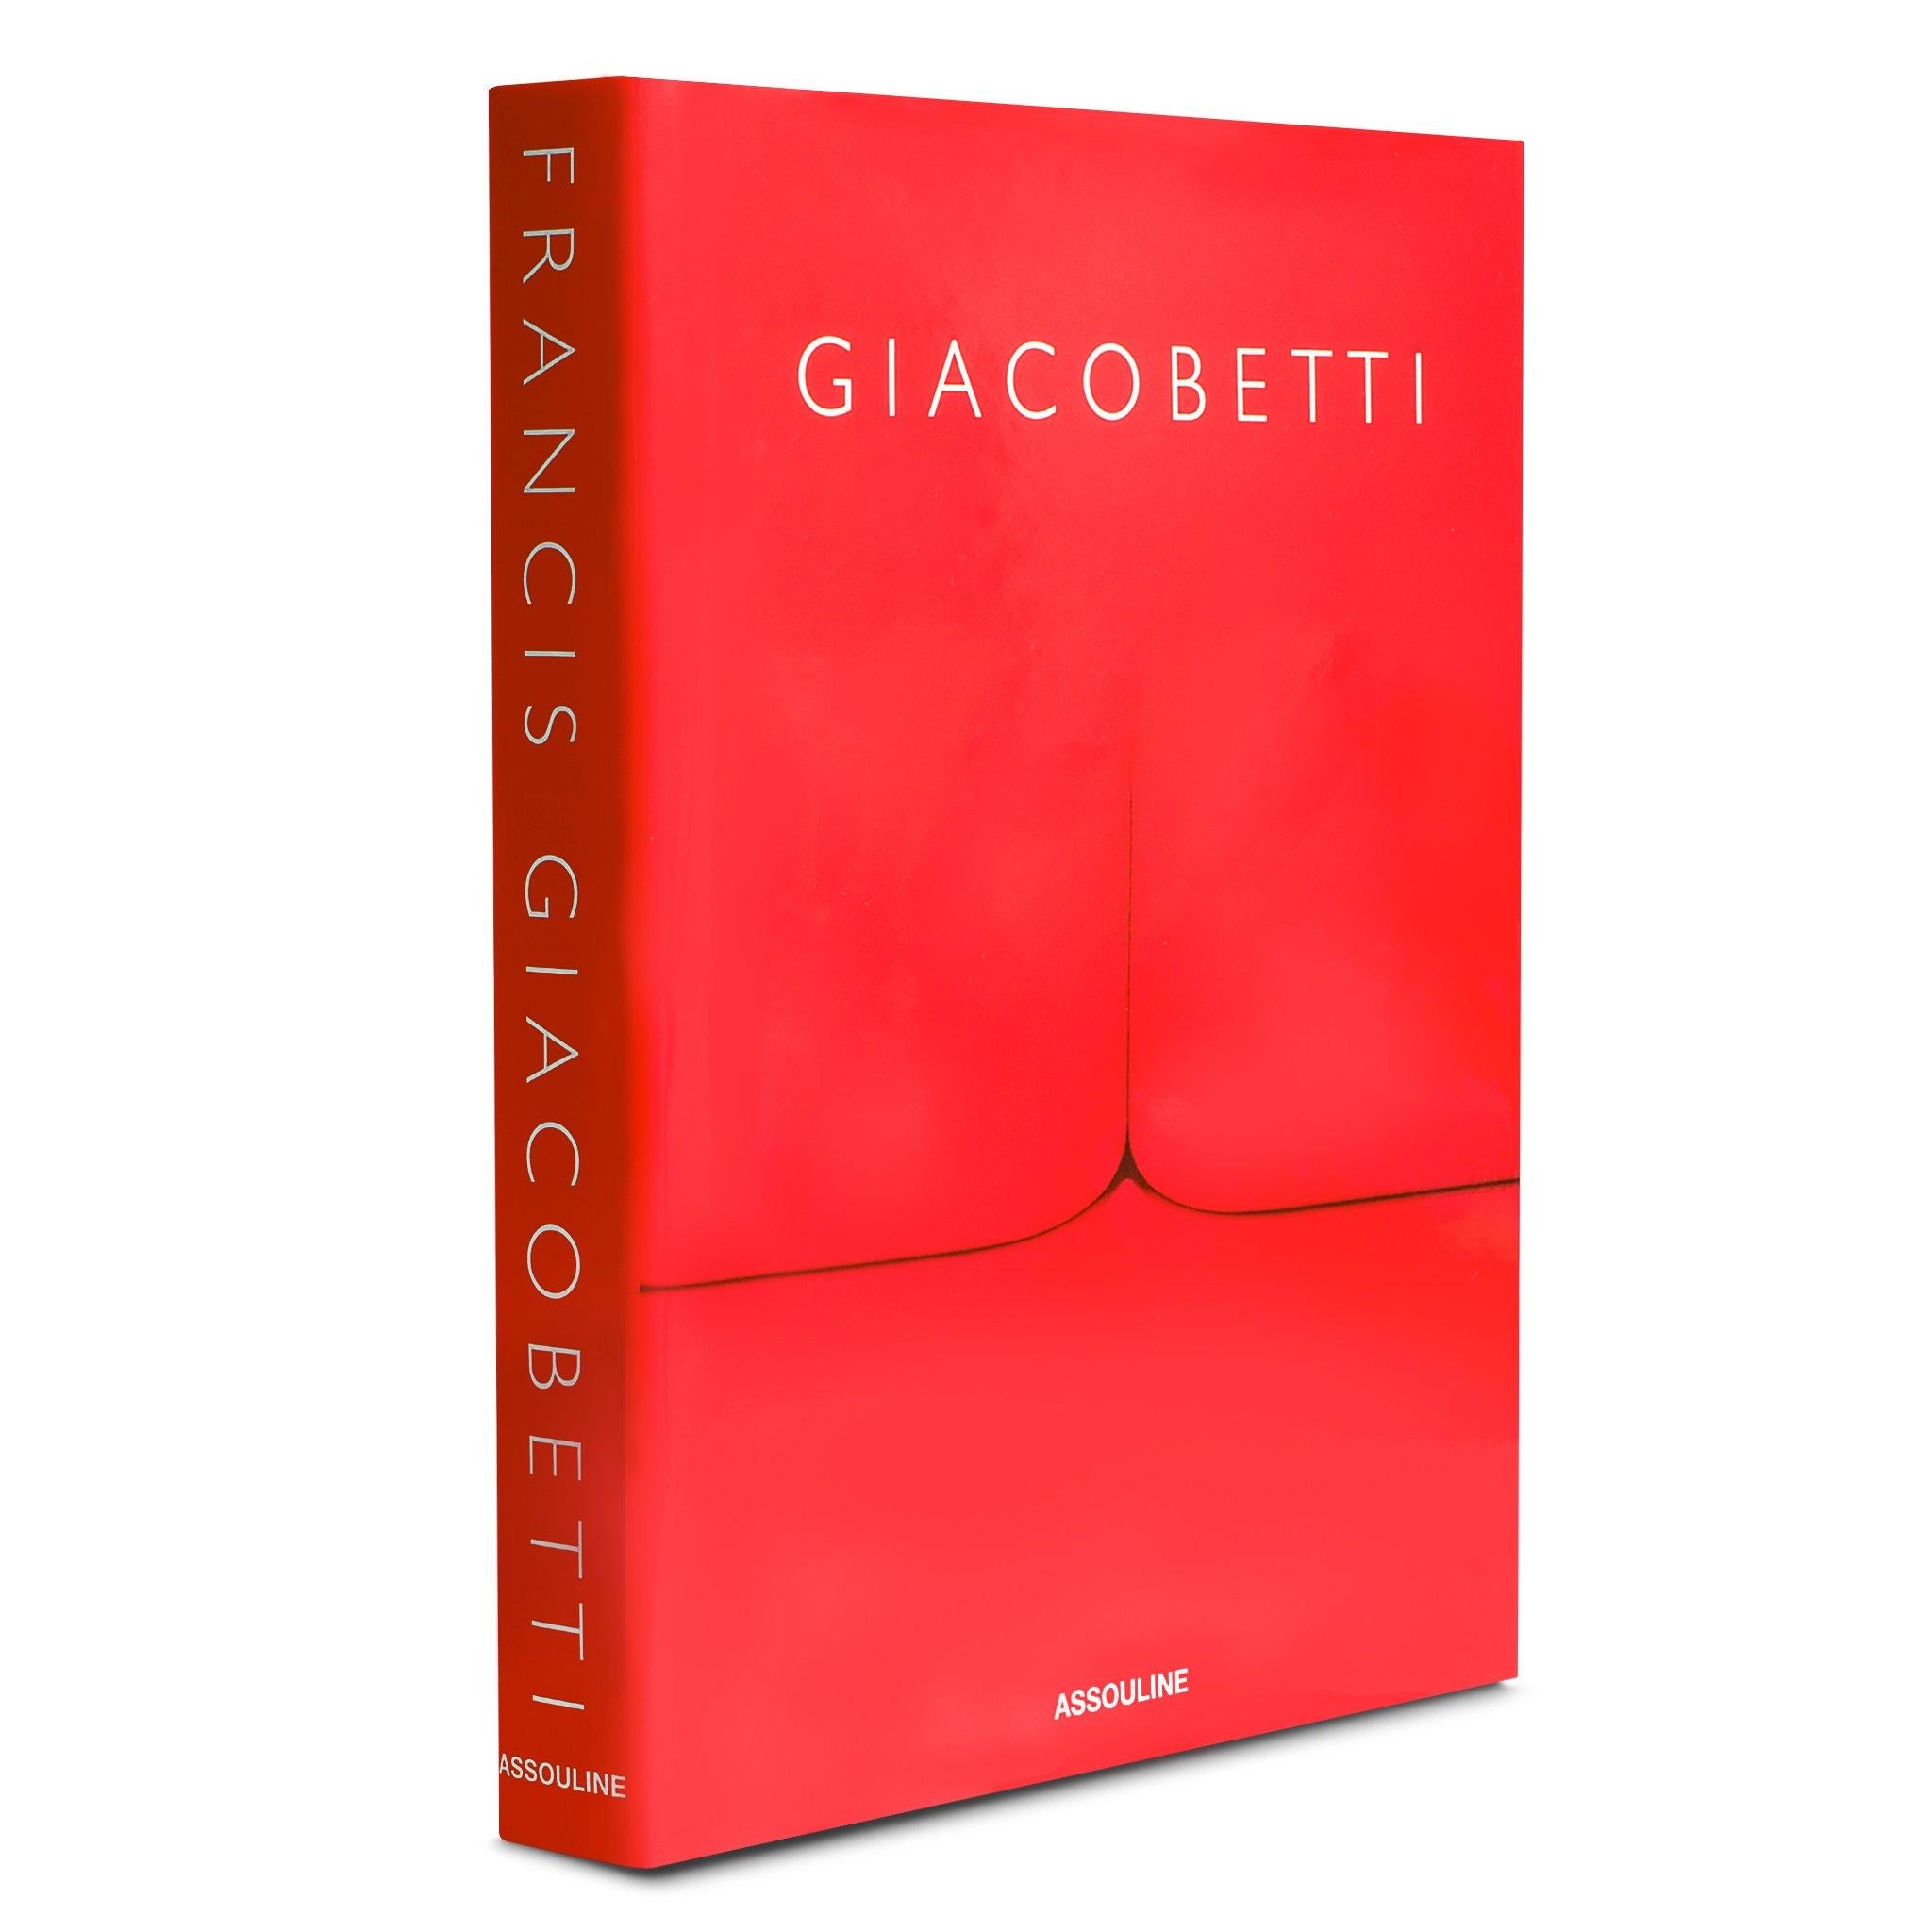 Giacobetti (Hardcover) by Jérôme Neutres
In stock in Los Angeles

Francis Giacobetti reinvented not only the nude, but the entire artistic process of capturing images in video and photographs. From its inception, Giacobetti was the principal